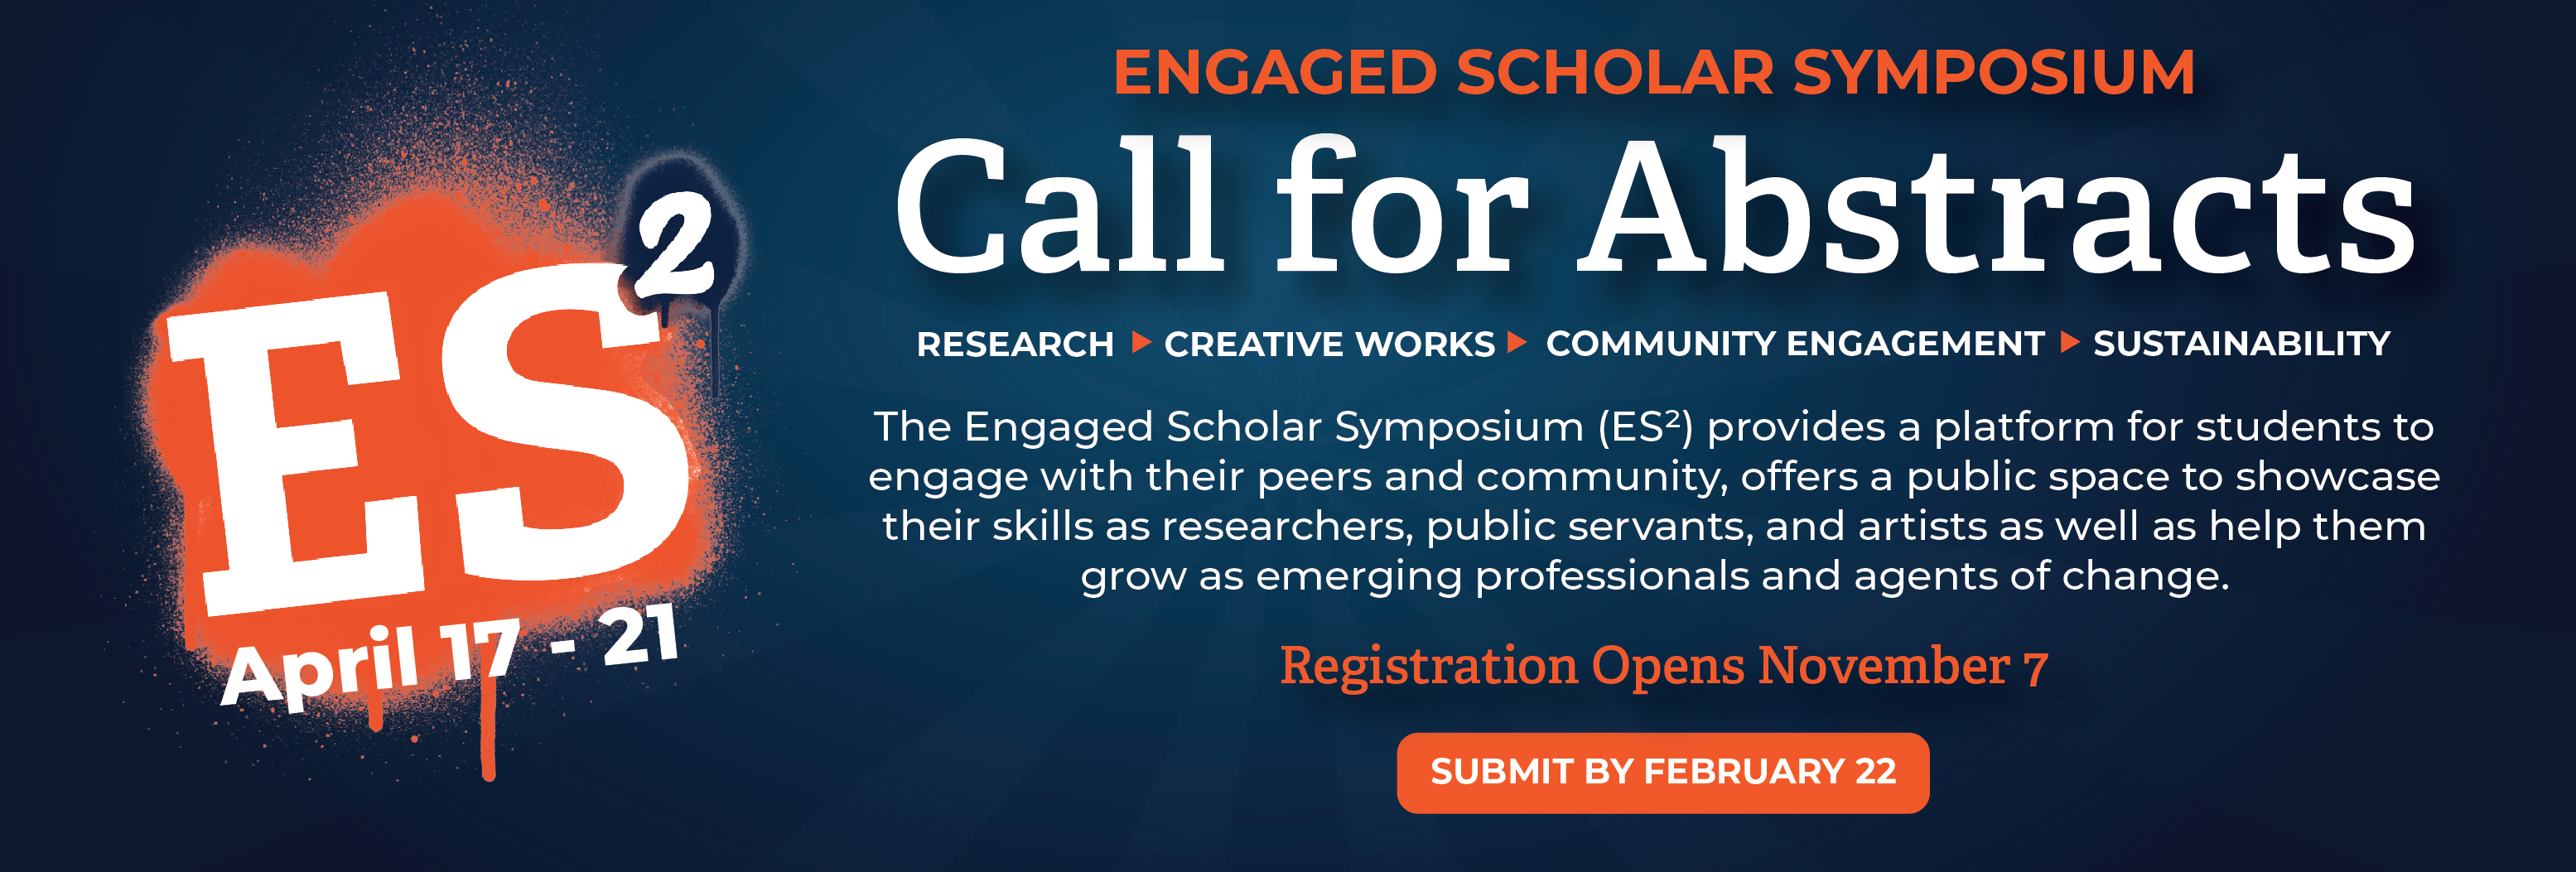 Engaged Scholar Symposium call for abstracts now open!